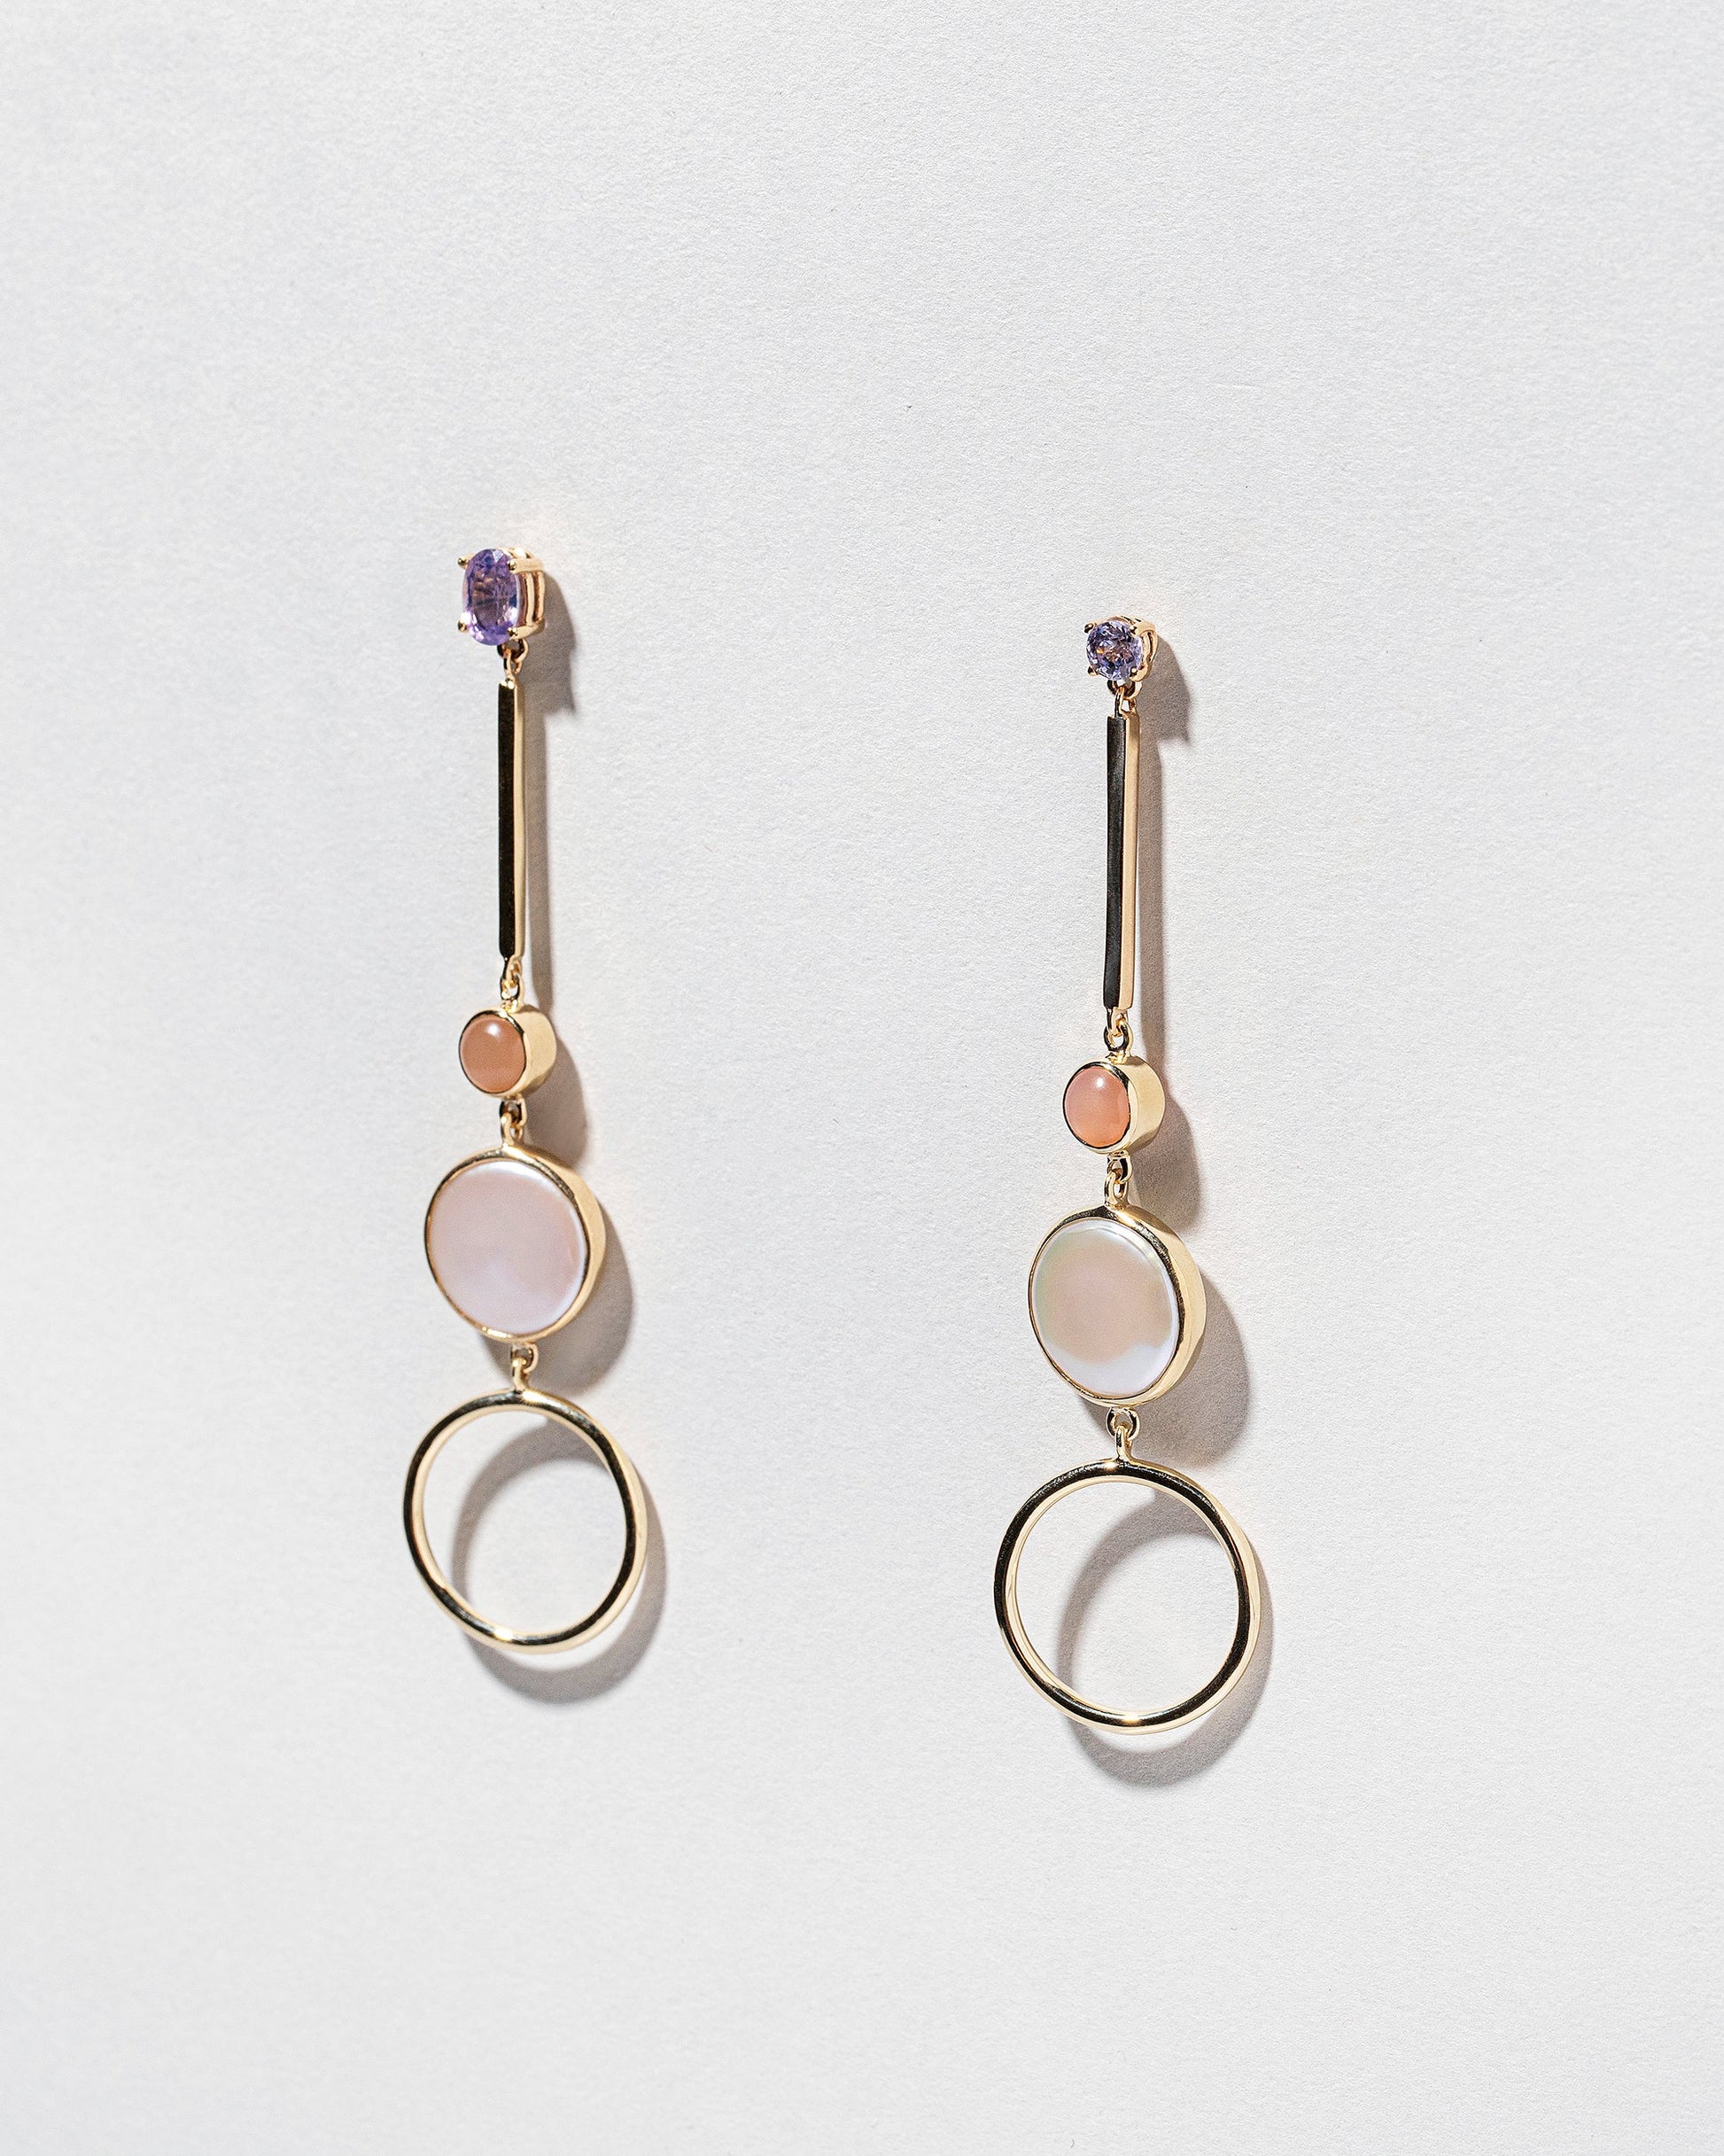  Act 3. Earrings on light color background.